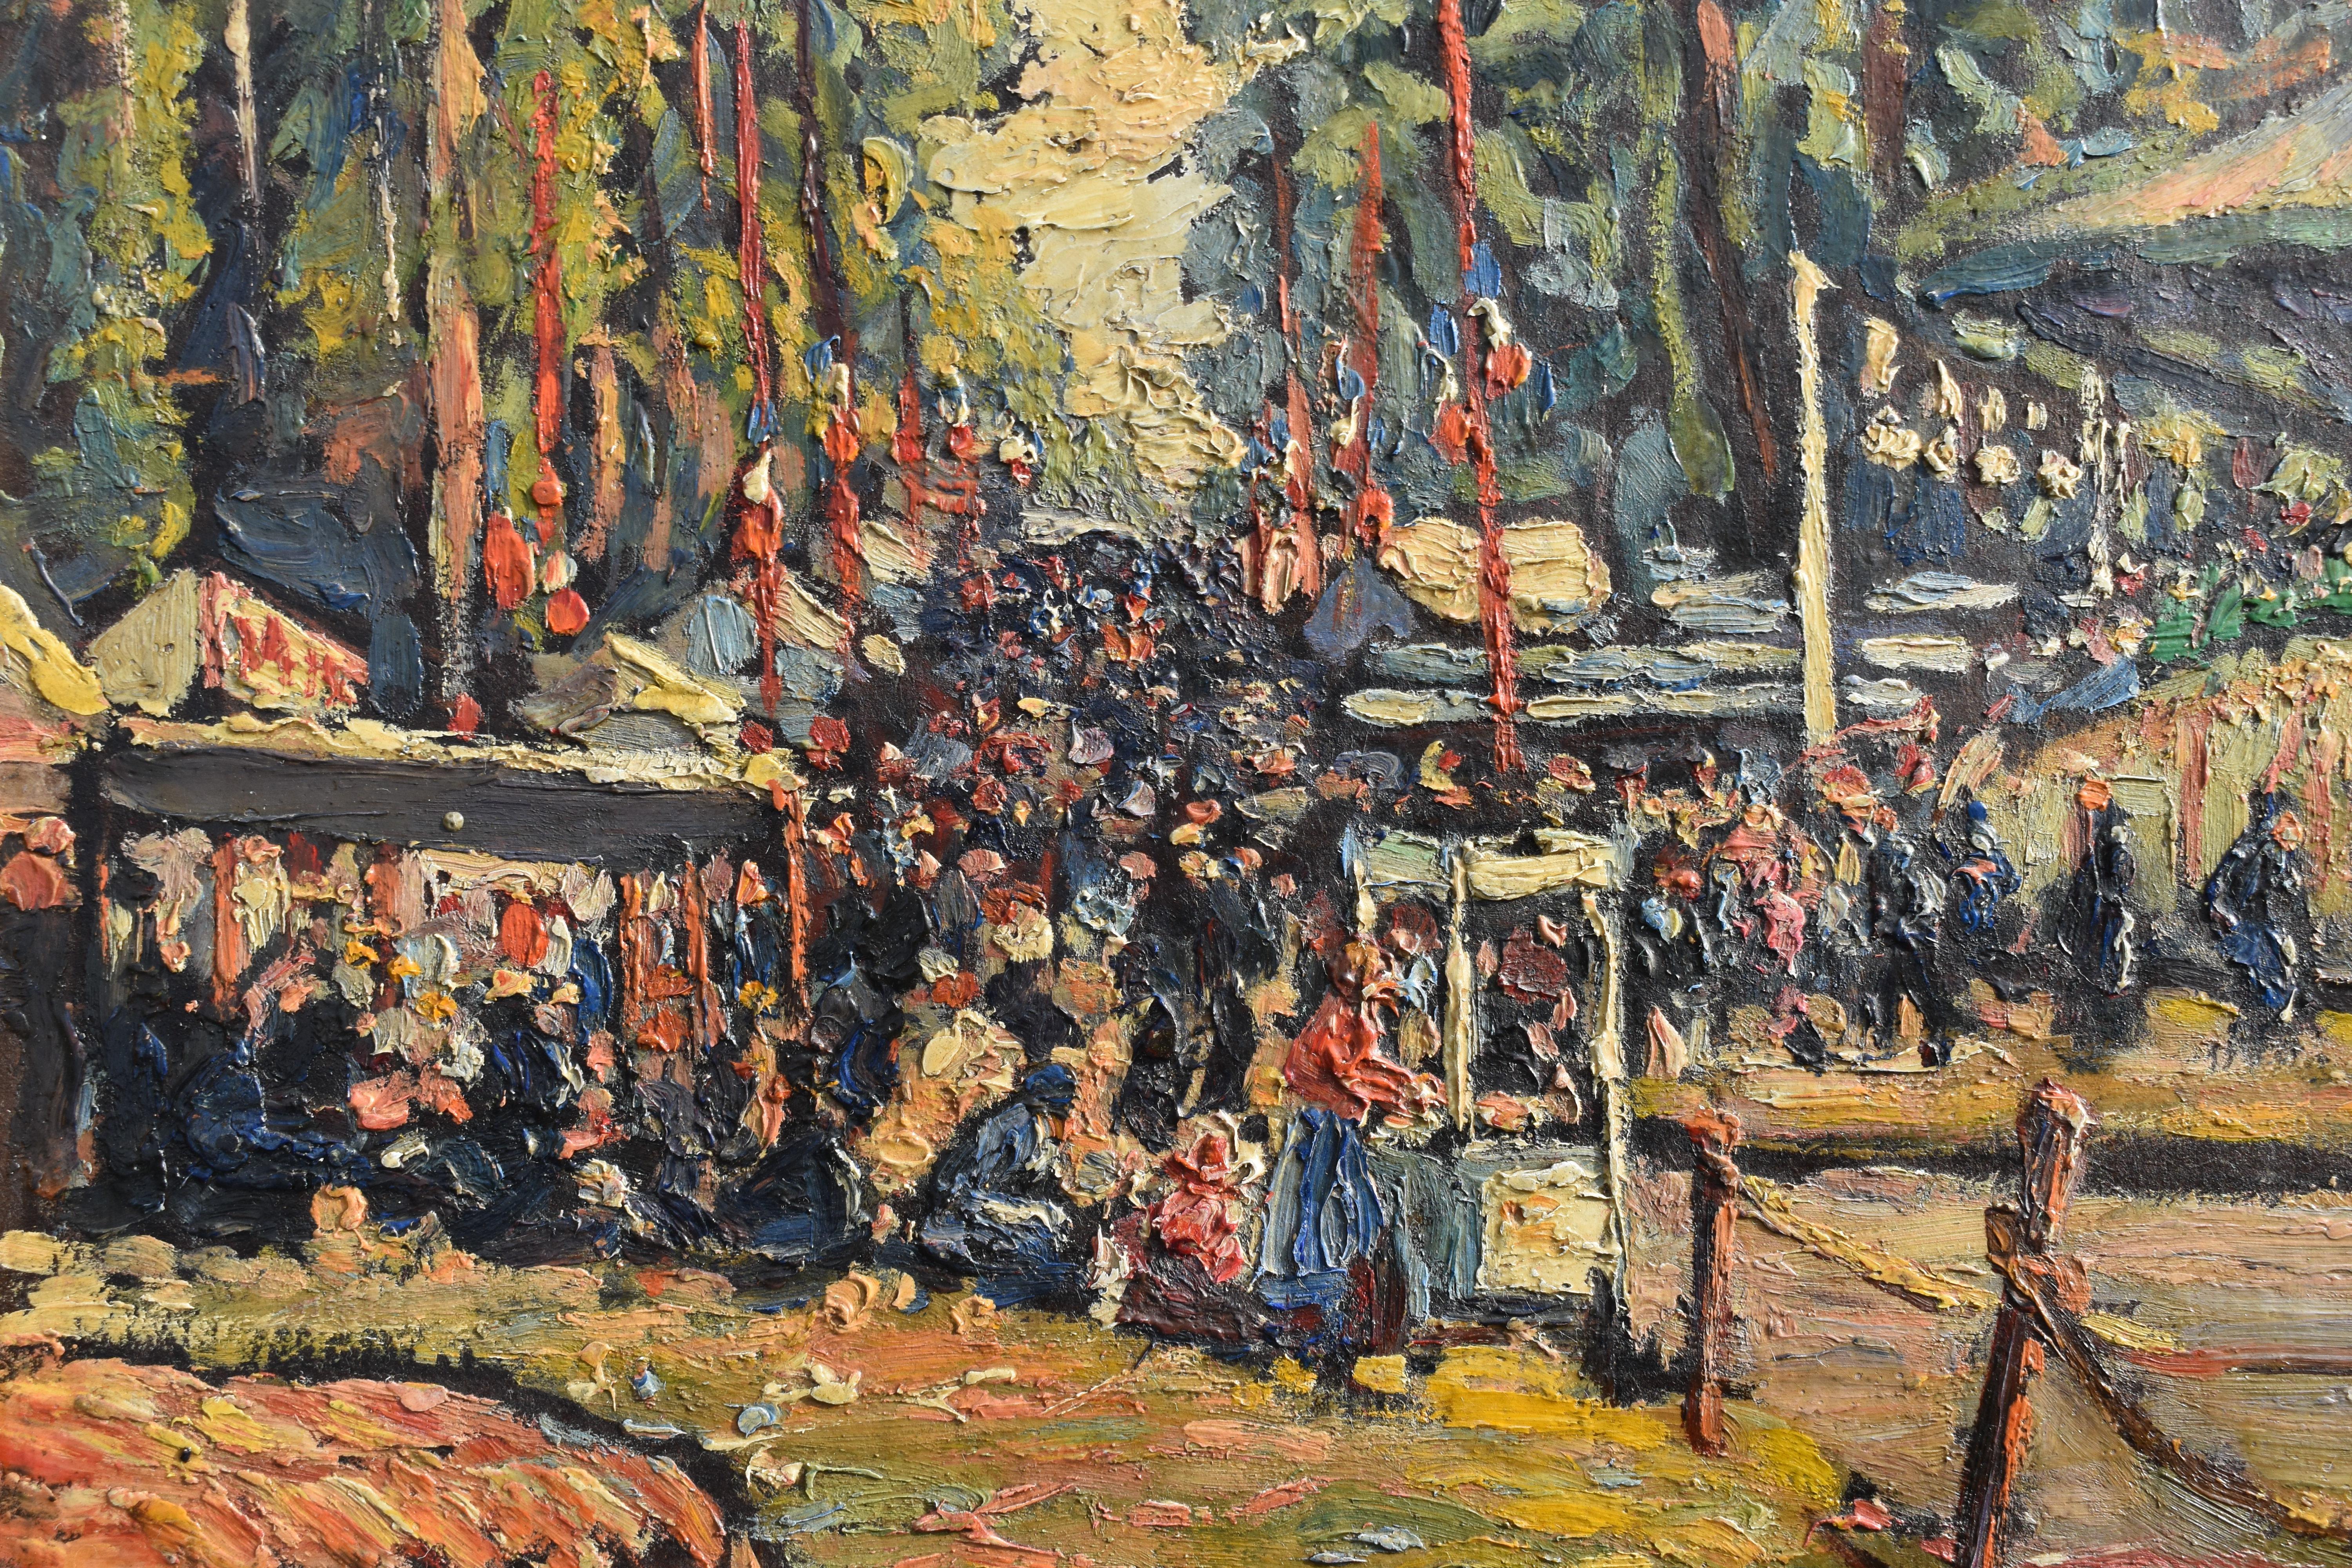 Fernand Laval (1886-1966) Paris School Art Deco Period
La fete des Loges 1929

A delightful post impressionist painting of a fairground scene in Loges, northern France.  Painted using a heavy impasto, signed and inscribed verso.
Laval moved to Paris